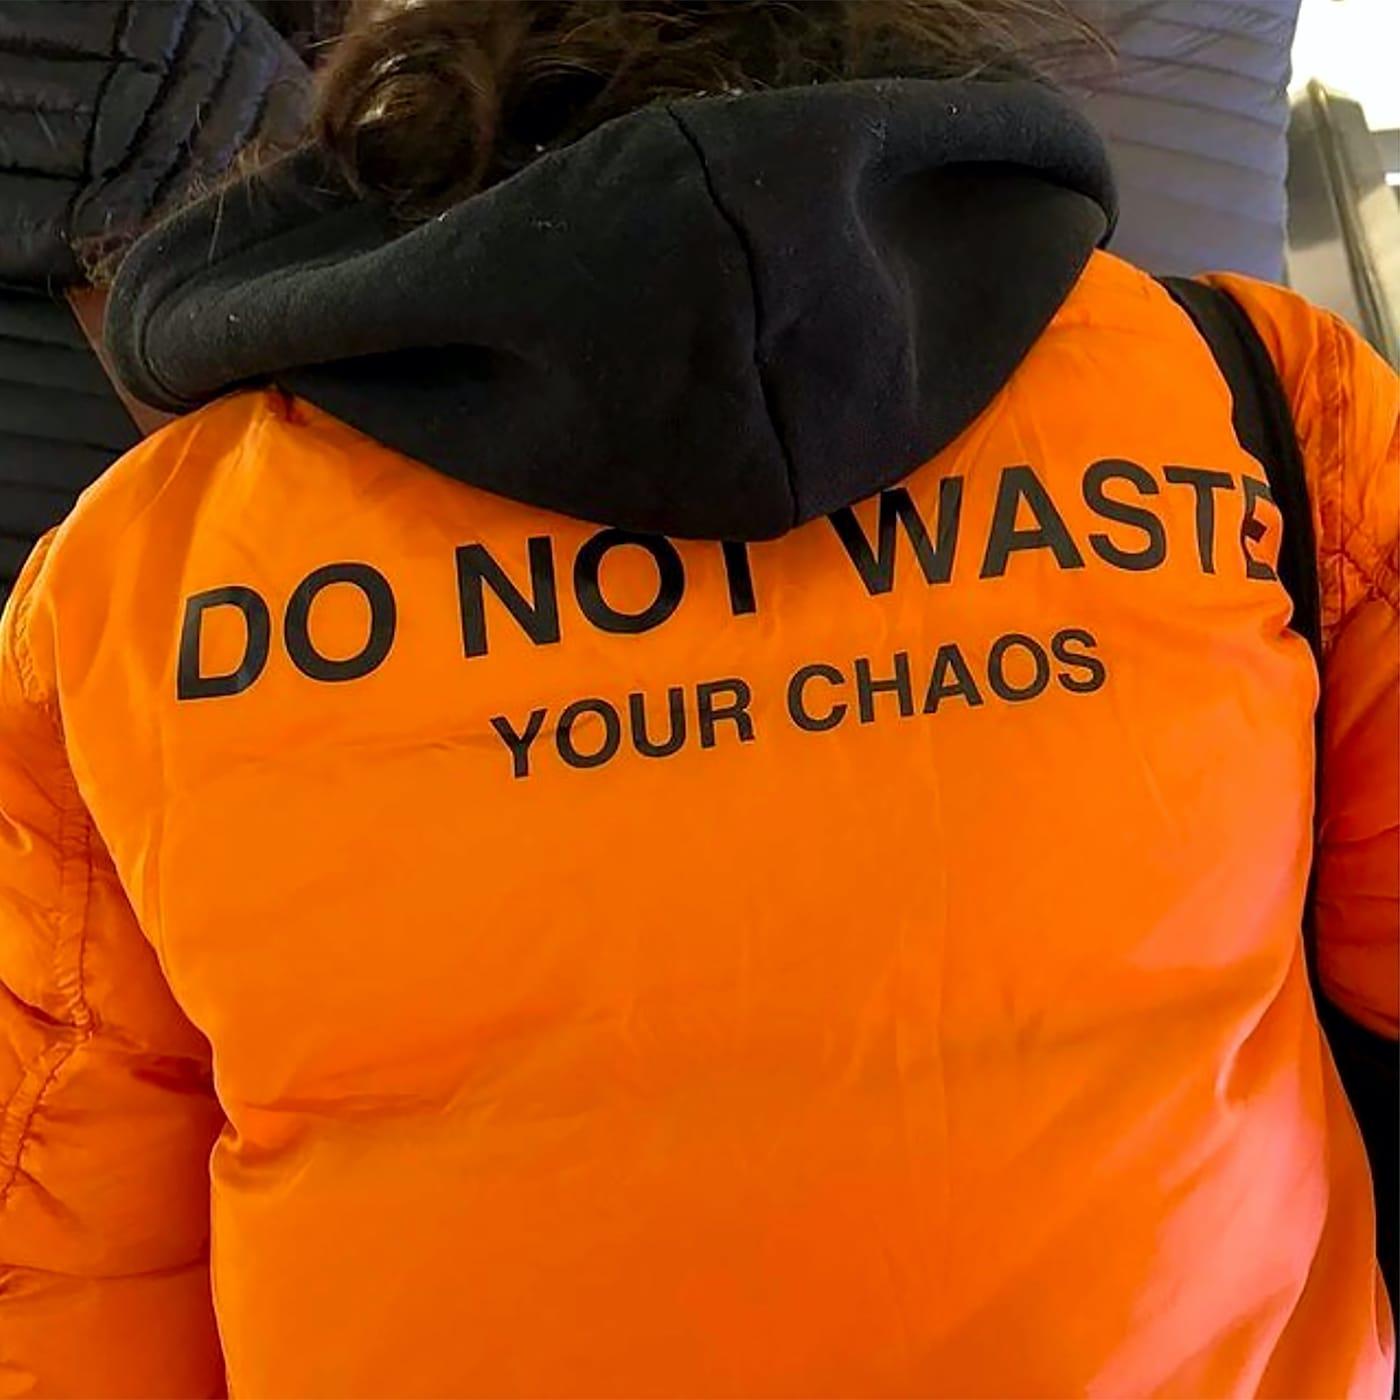 Image from the Shanzhai Lyric archive. DO NOT WASTE YOUR CHAOS. Photo by Fan Xiaobing.